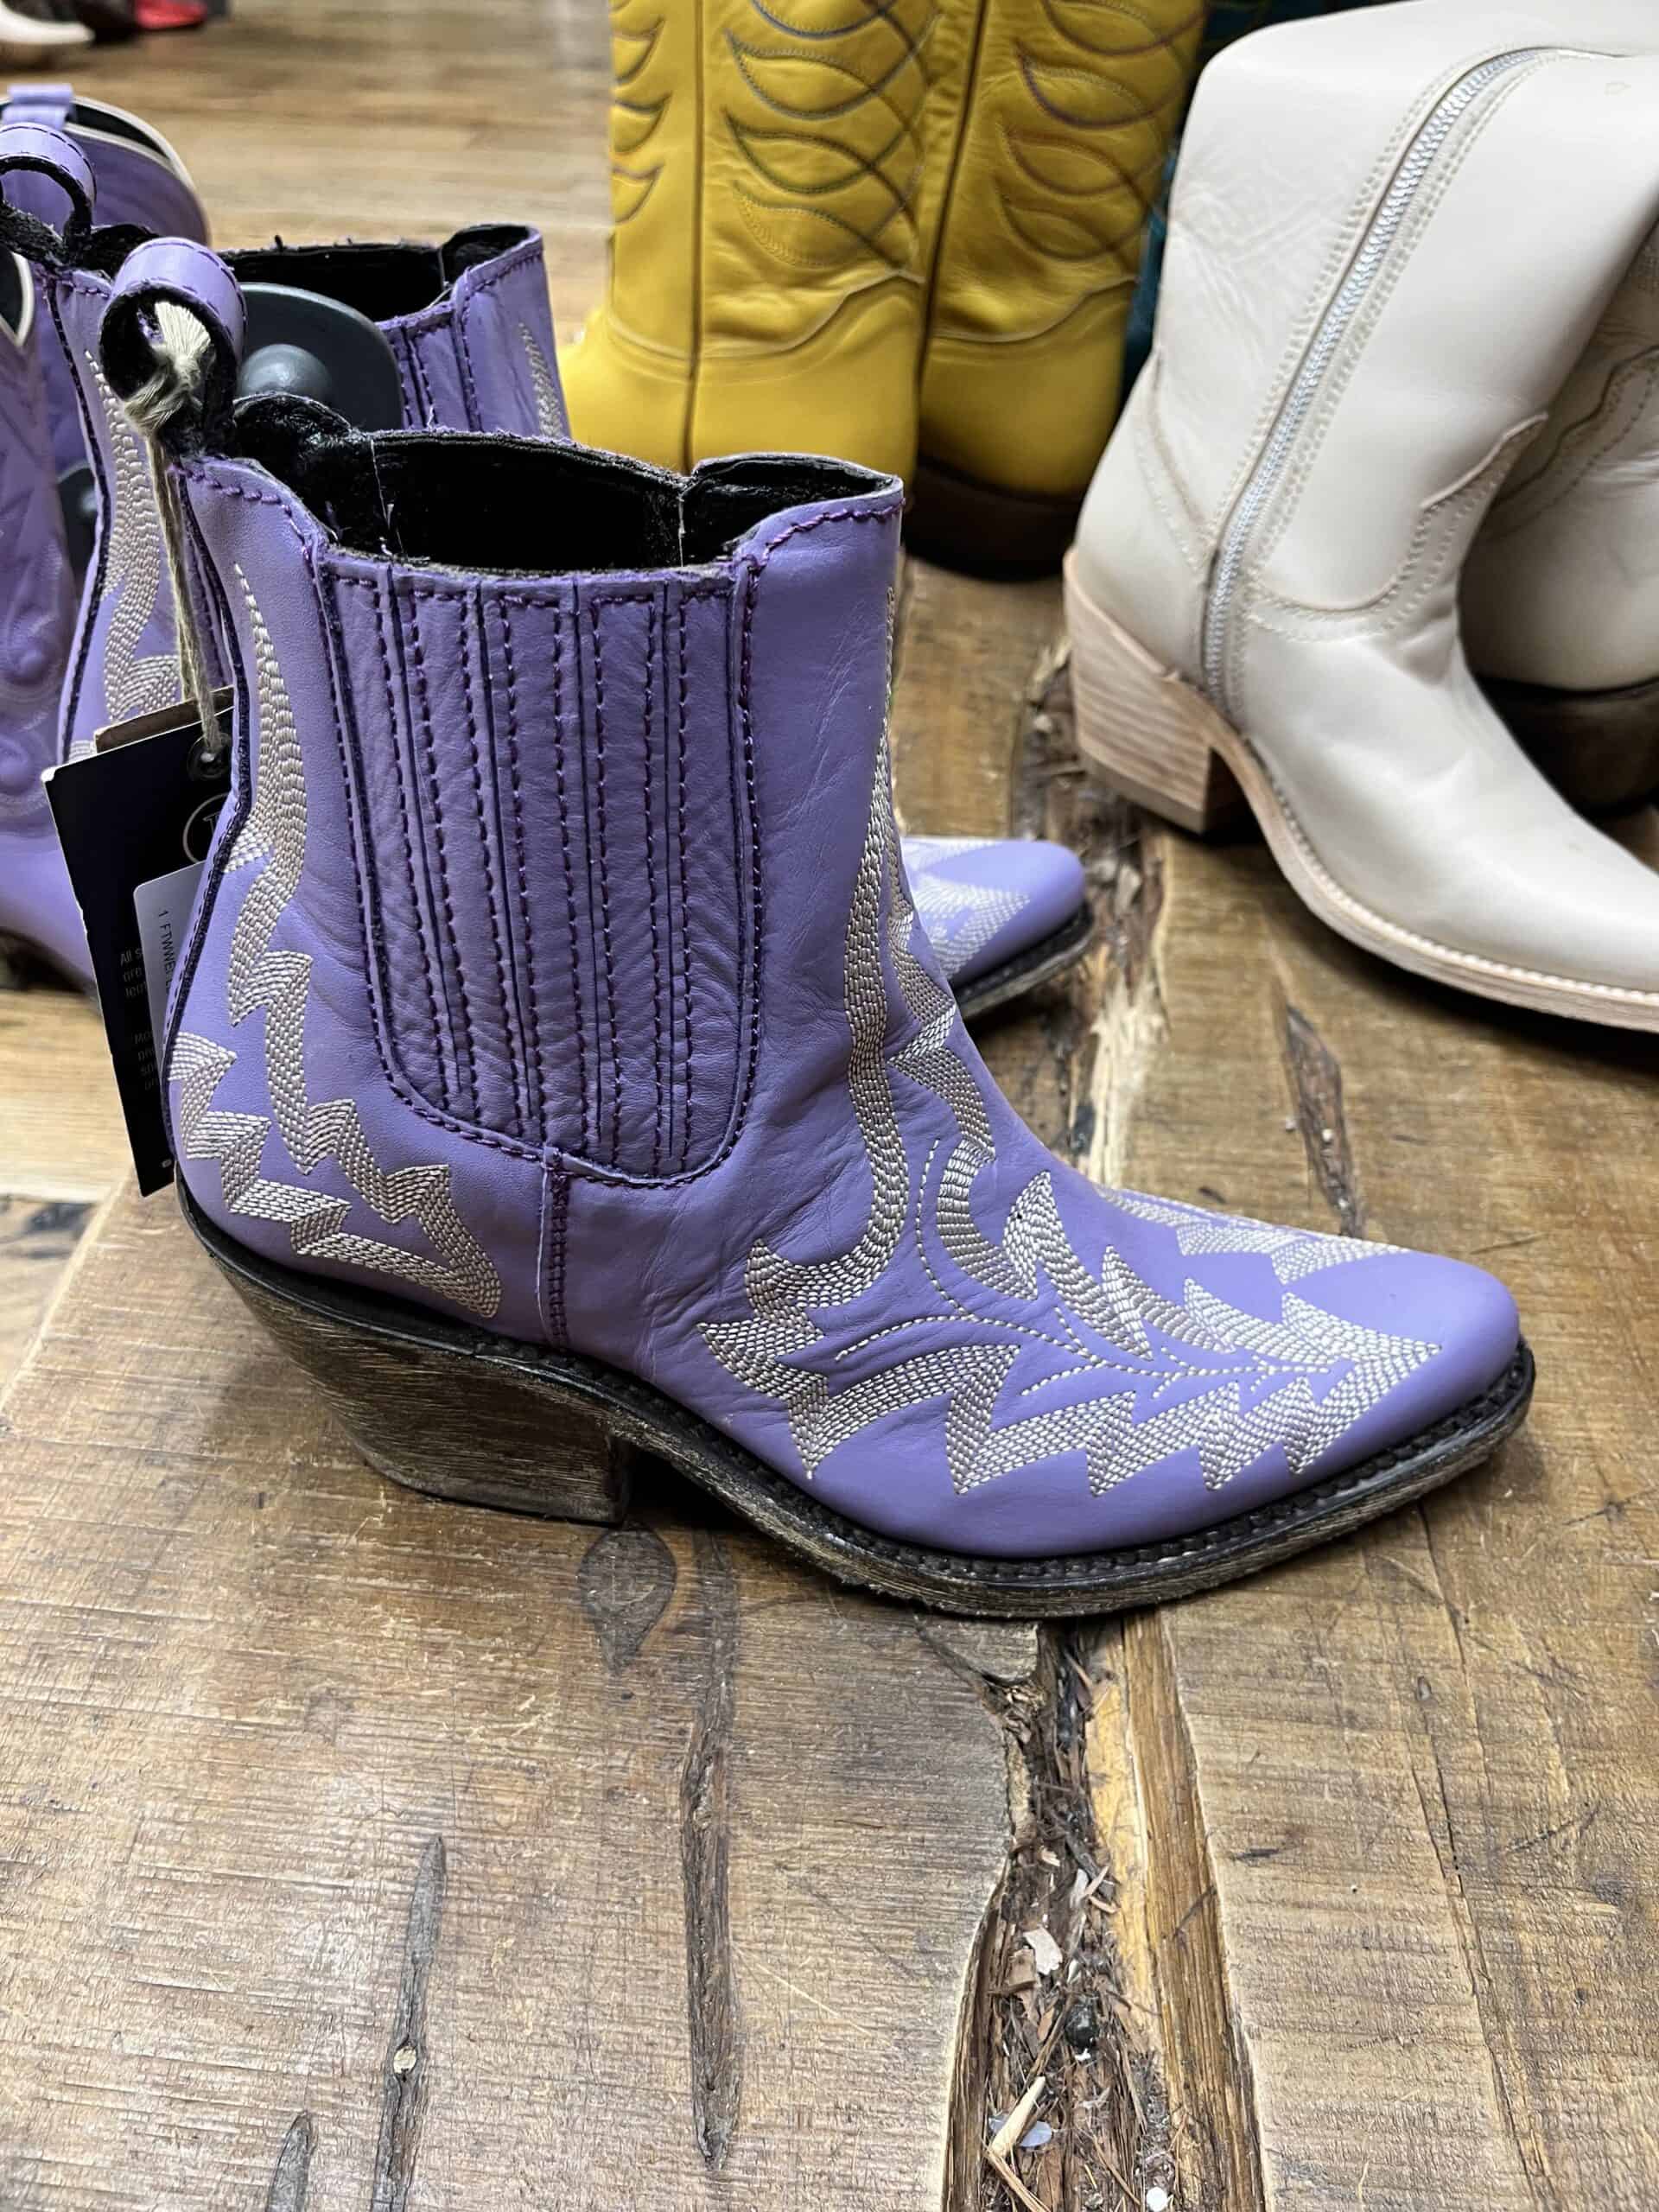 retail women ss23 western booties leather emboidery lavender allens boots